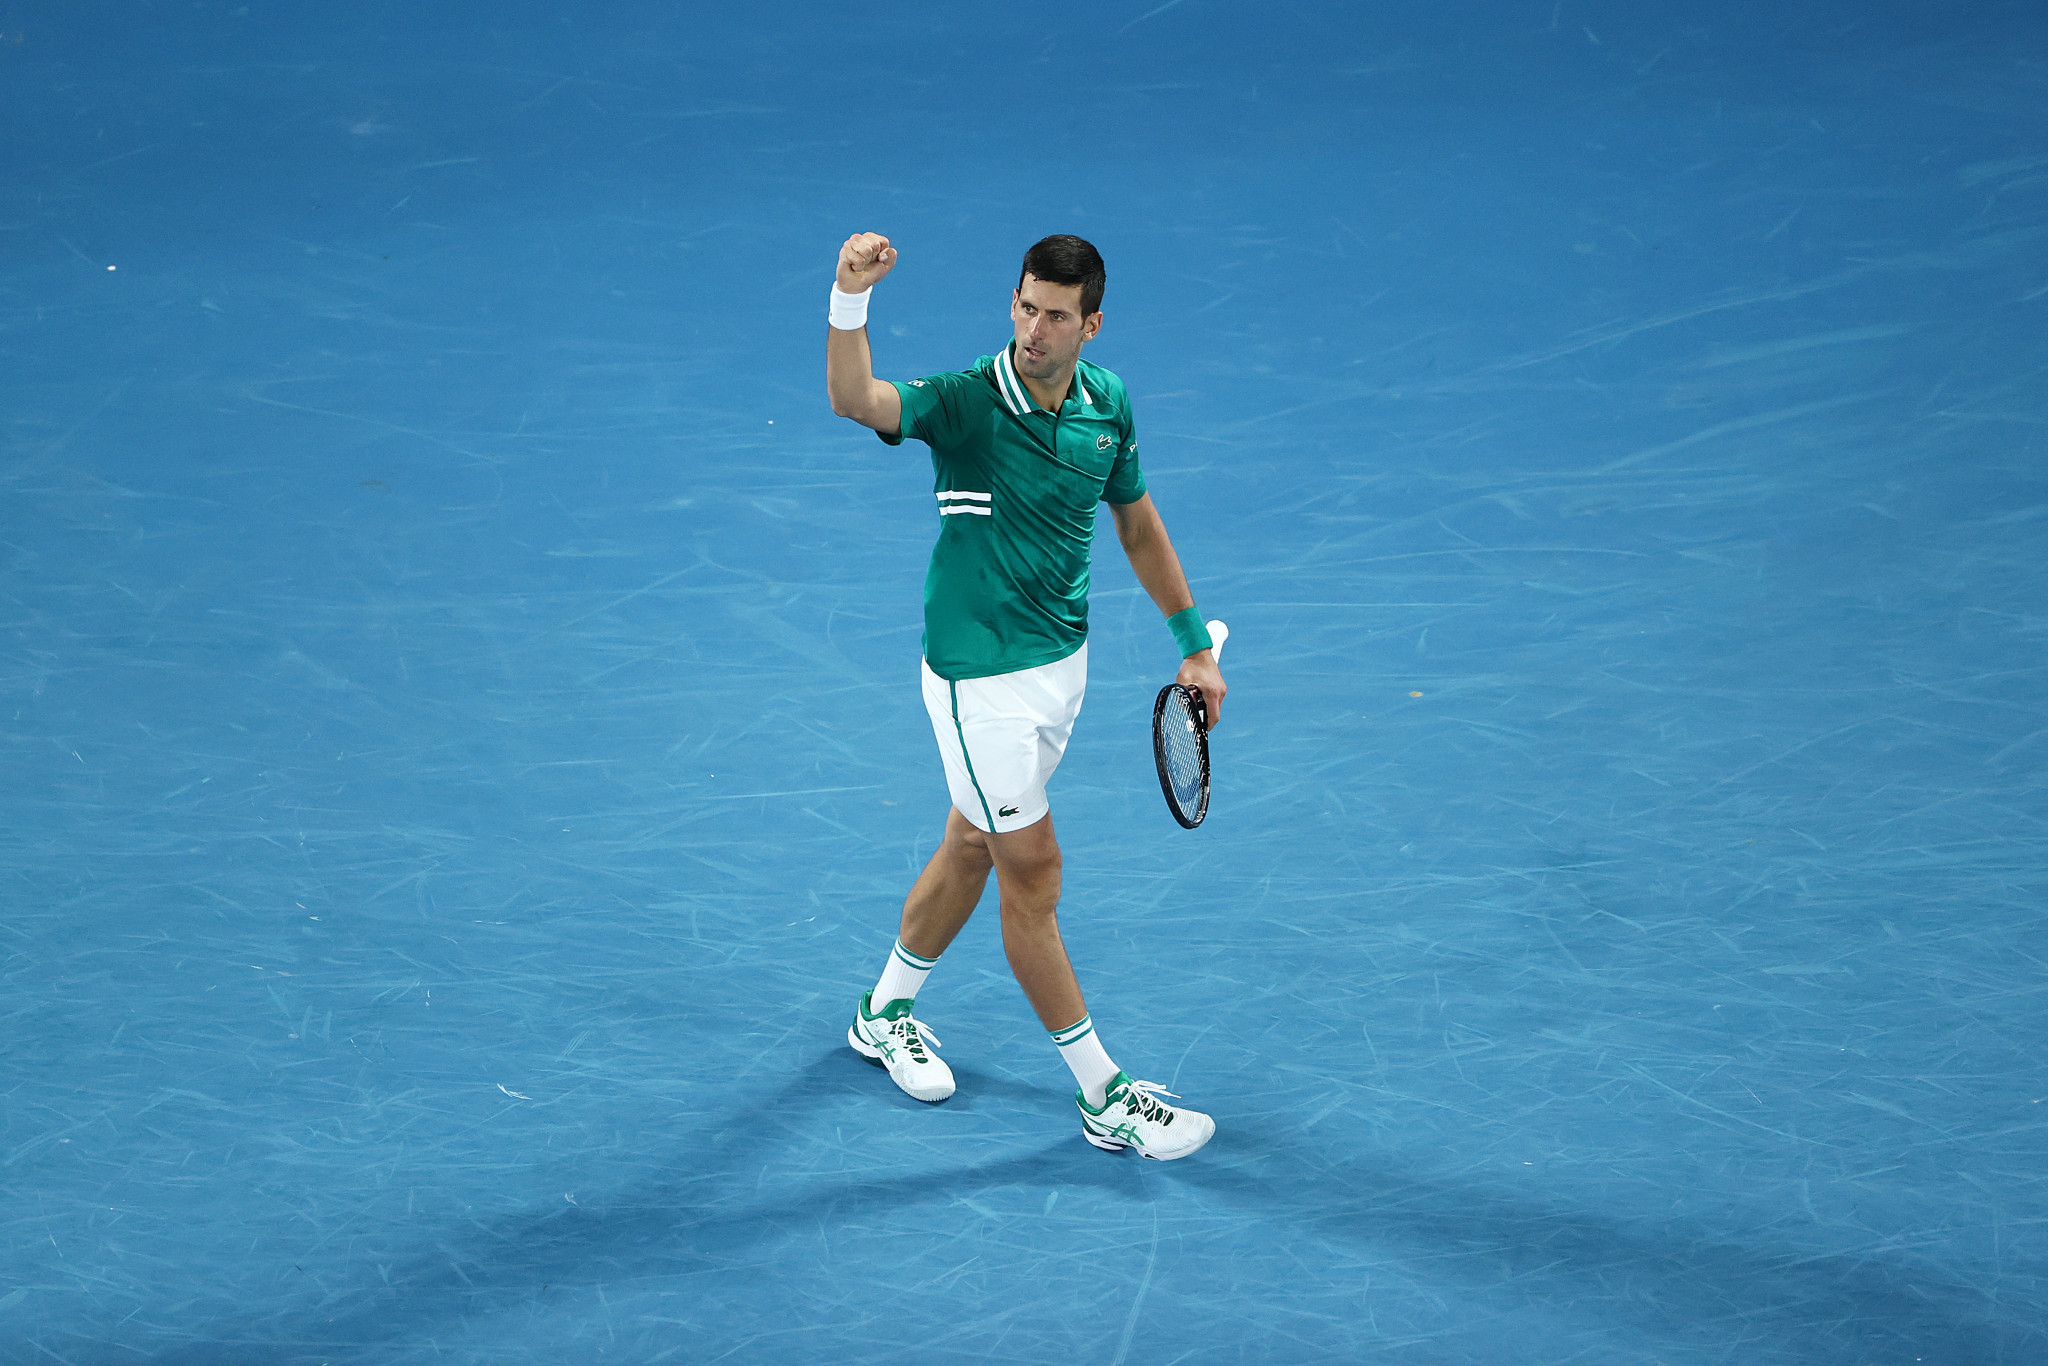 In the men's singles, world number one Novak Djokovic booked a place in the semi-finals ©Getty Images